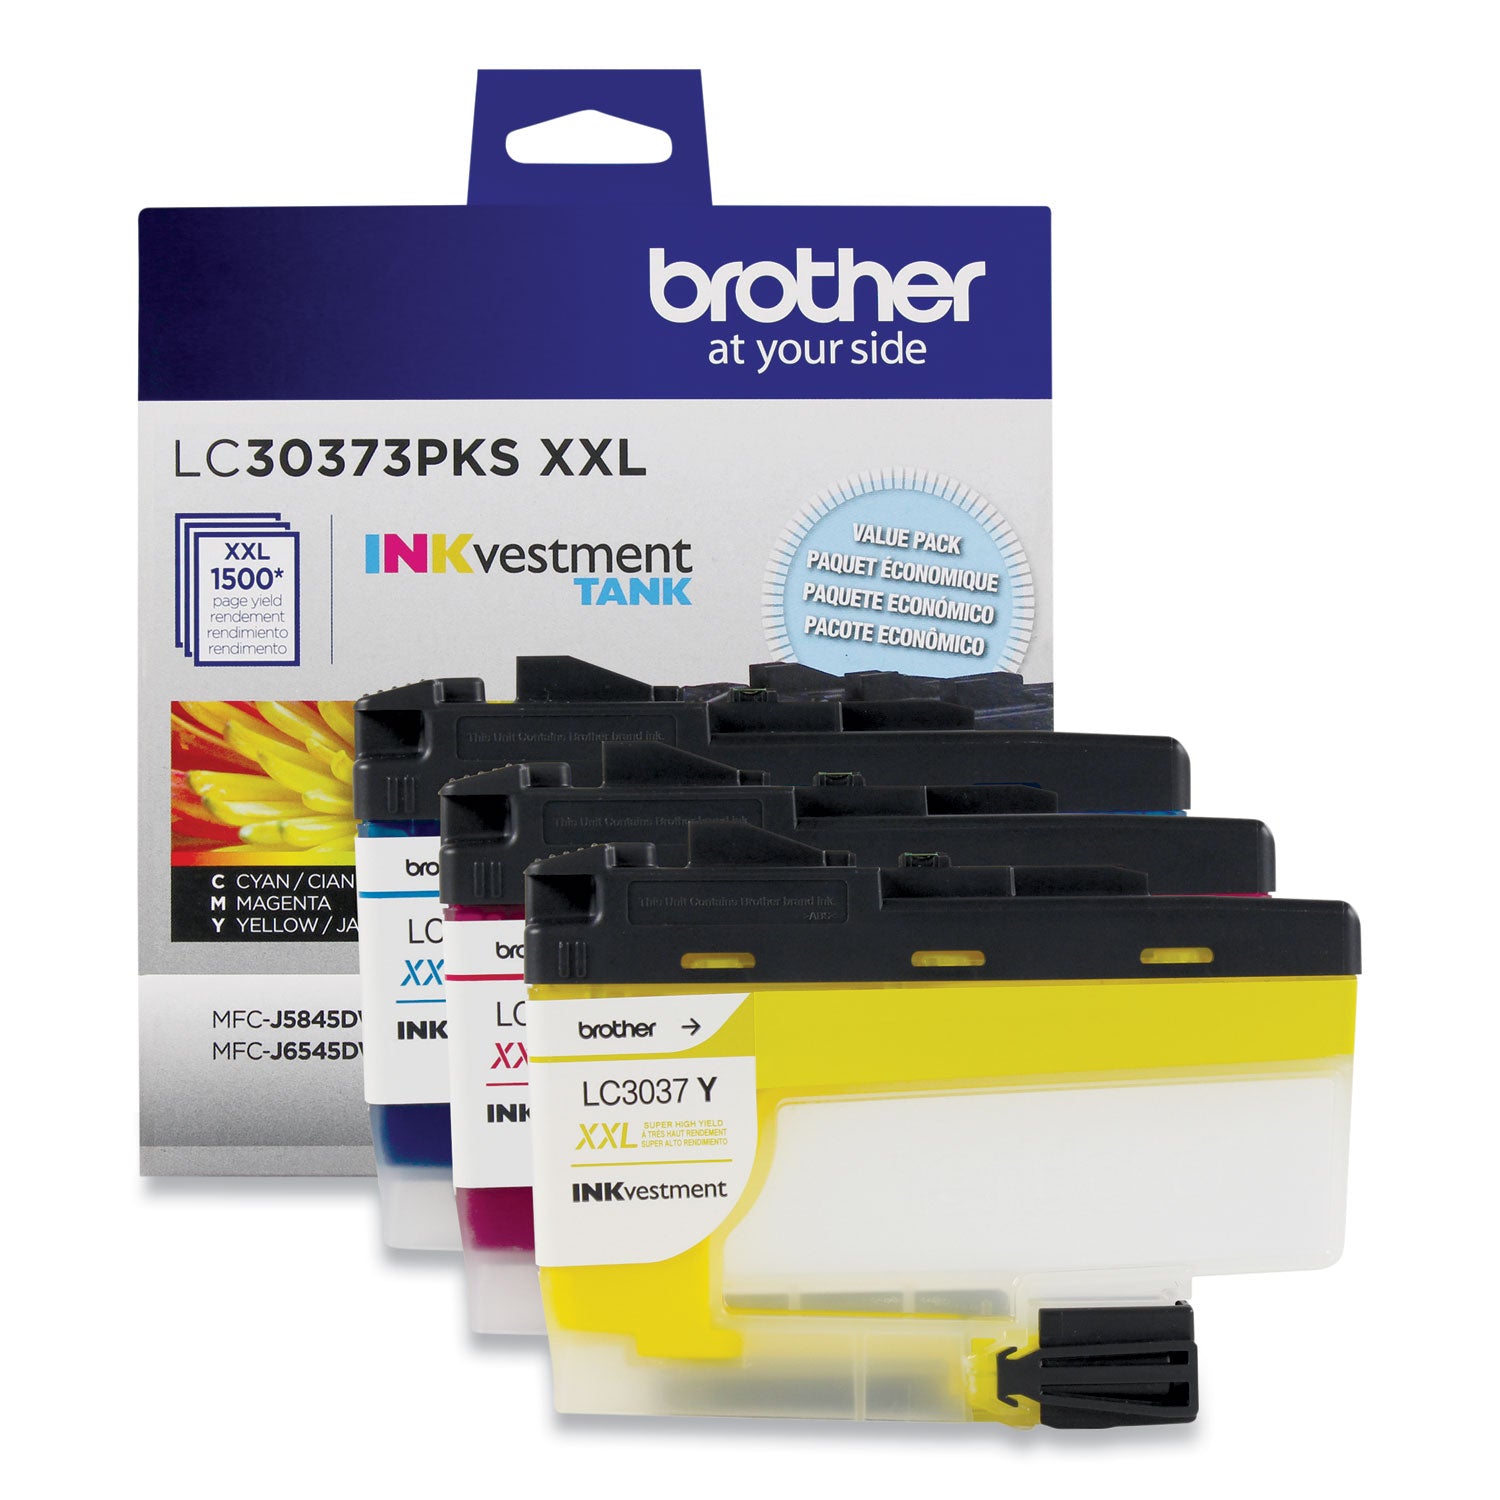 lc3037y-inkvestment-super-high-yield-ink-1500-page-yield-yellow_brtlc3037y - 4